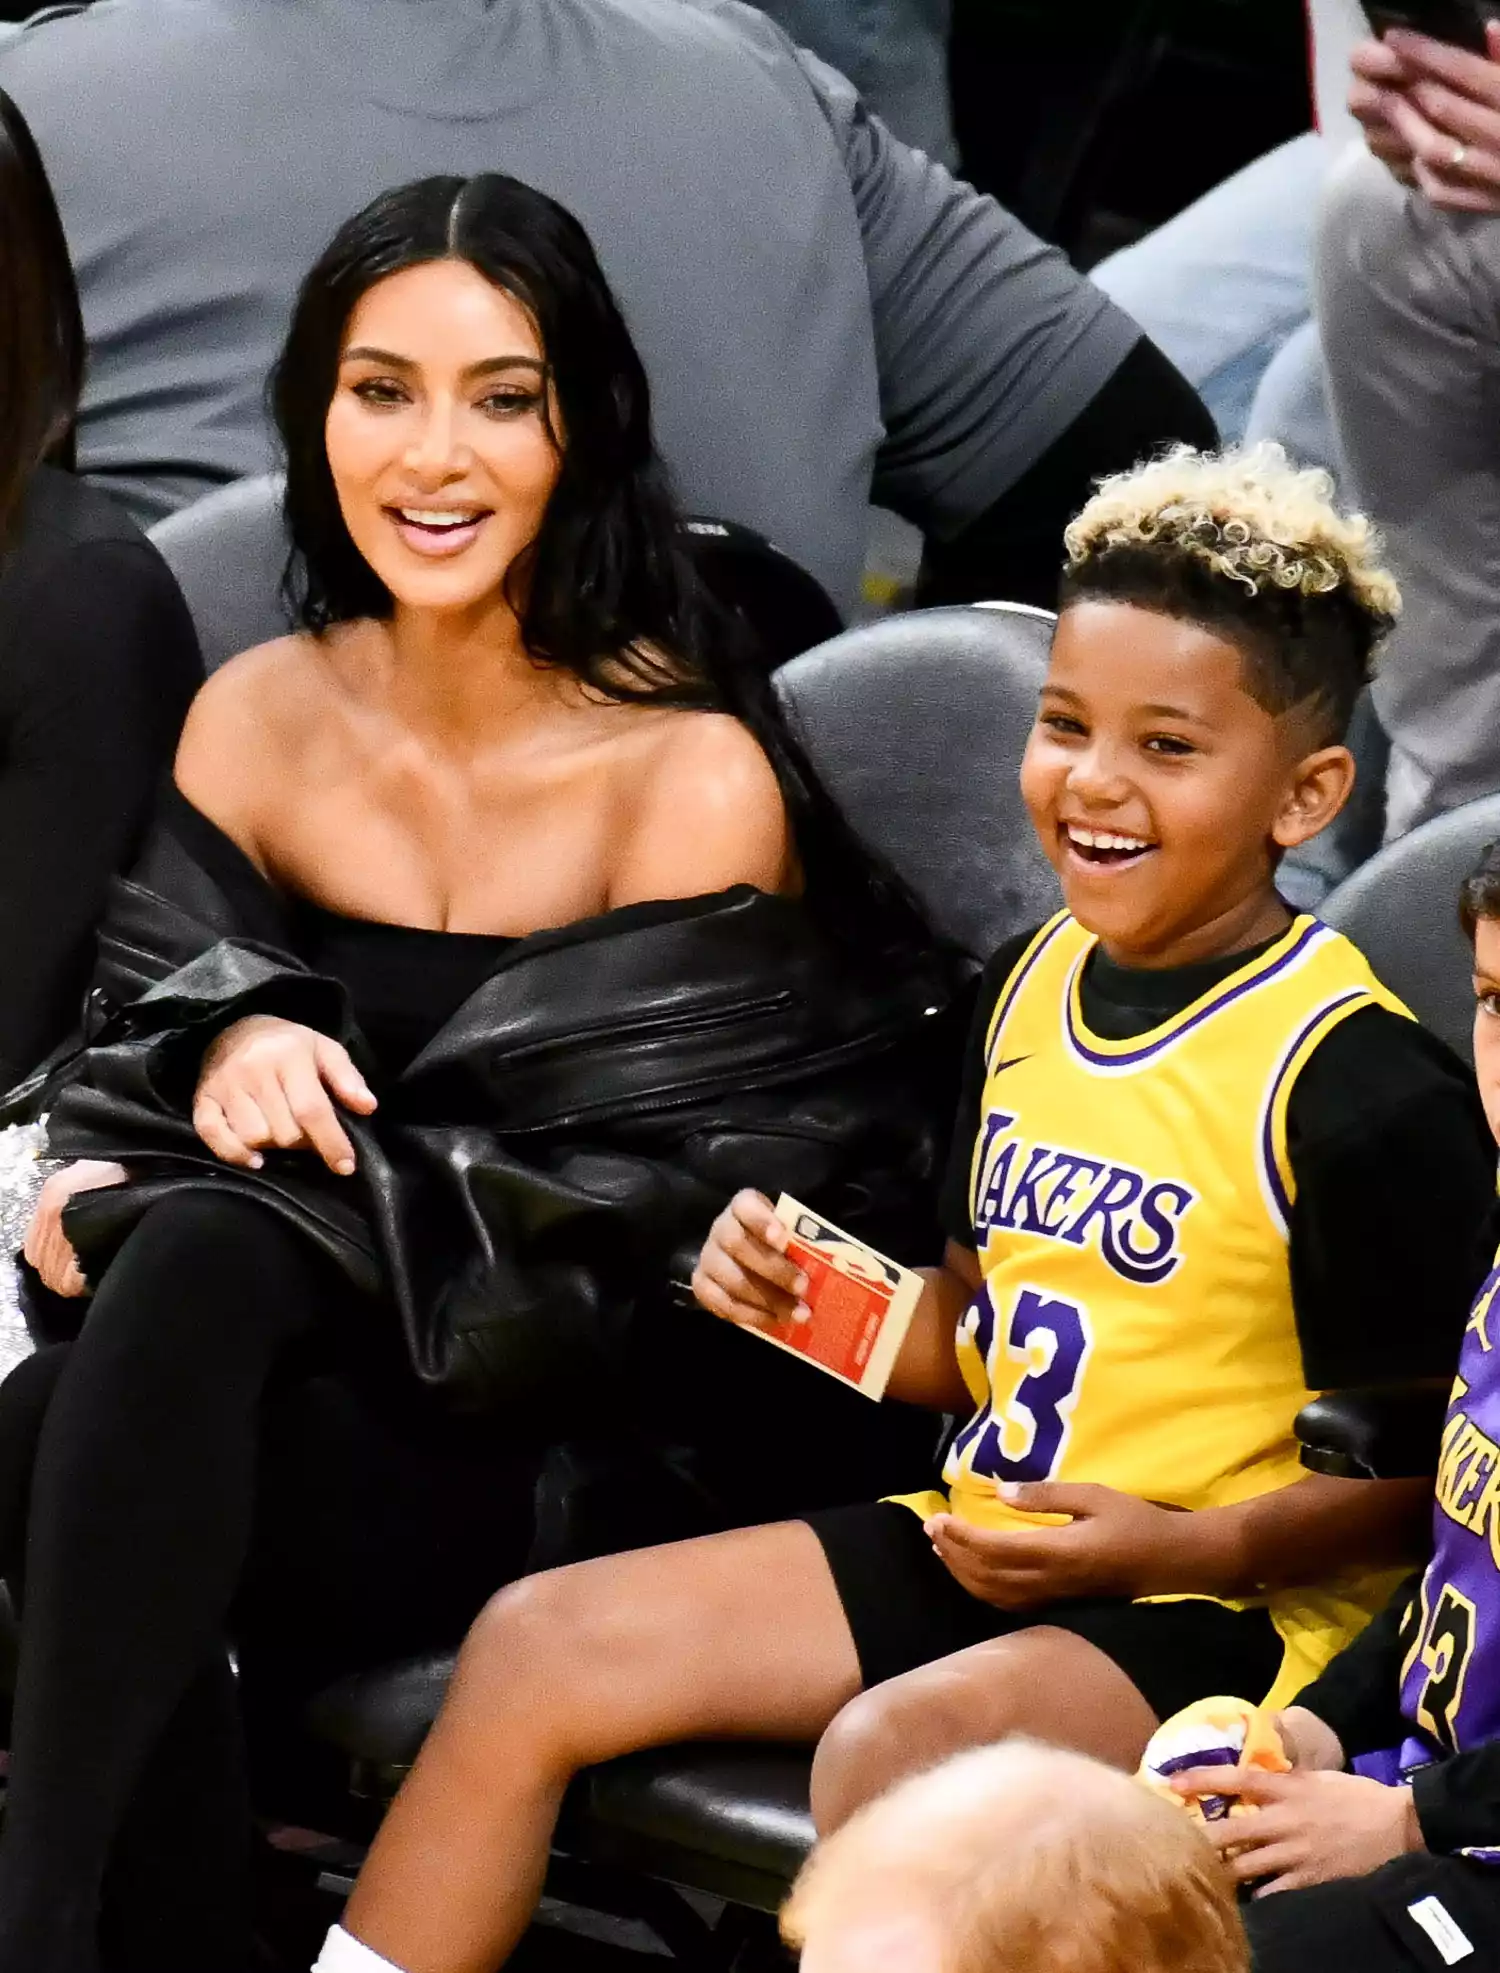 Kim K and son